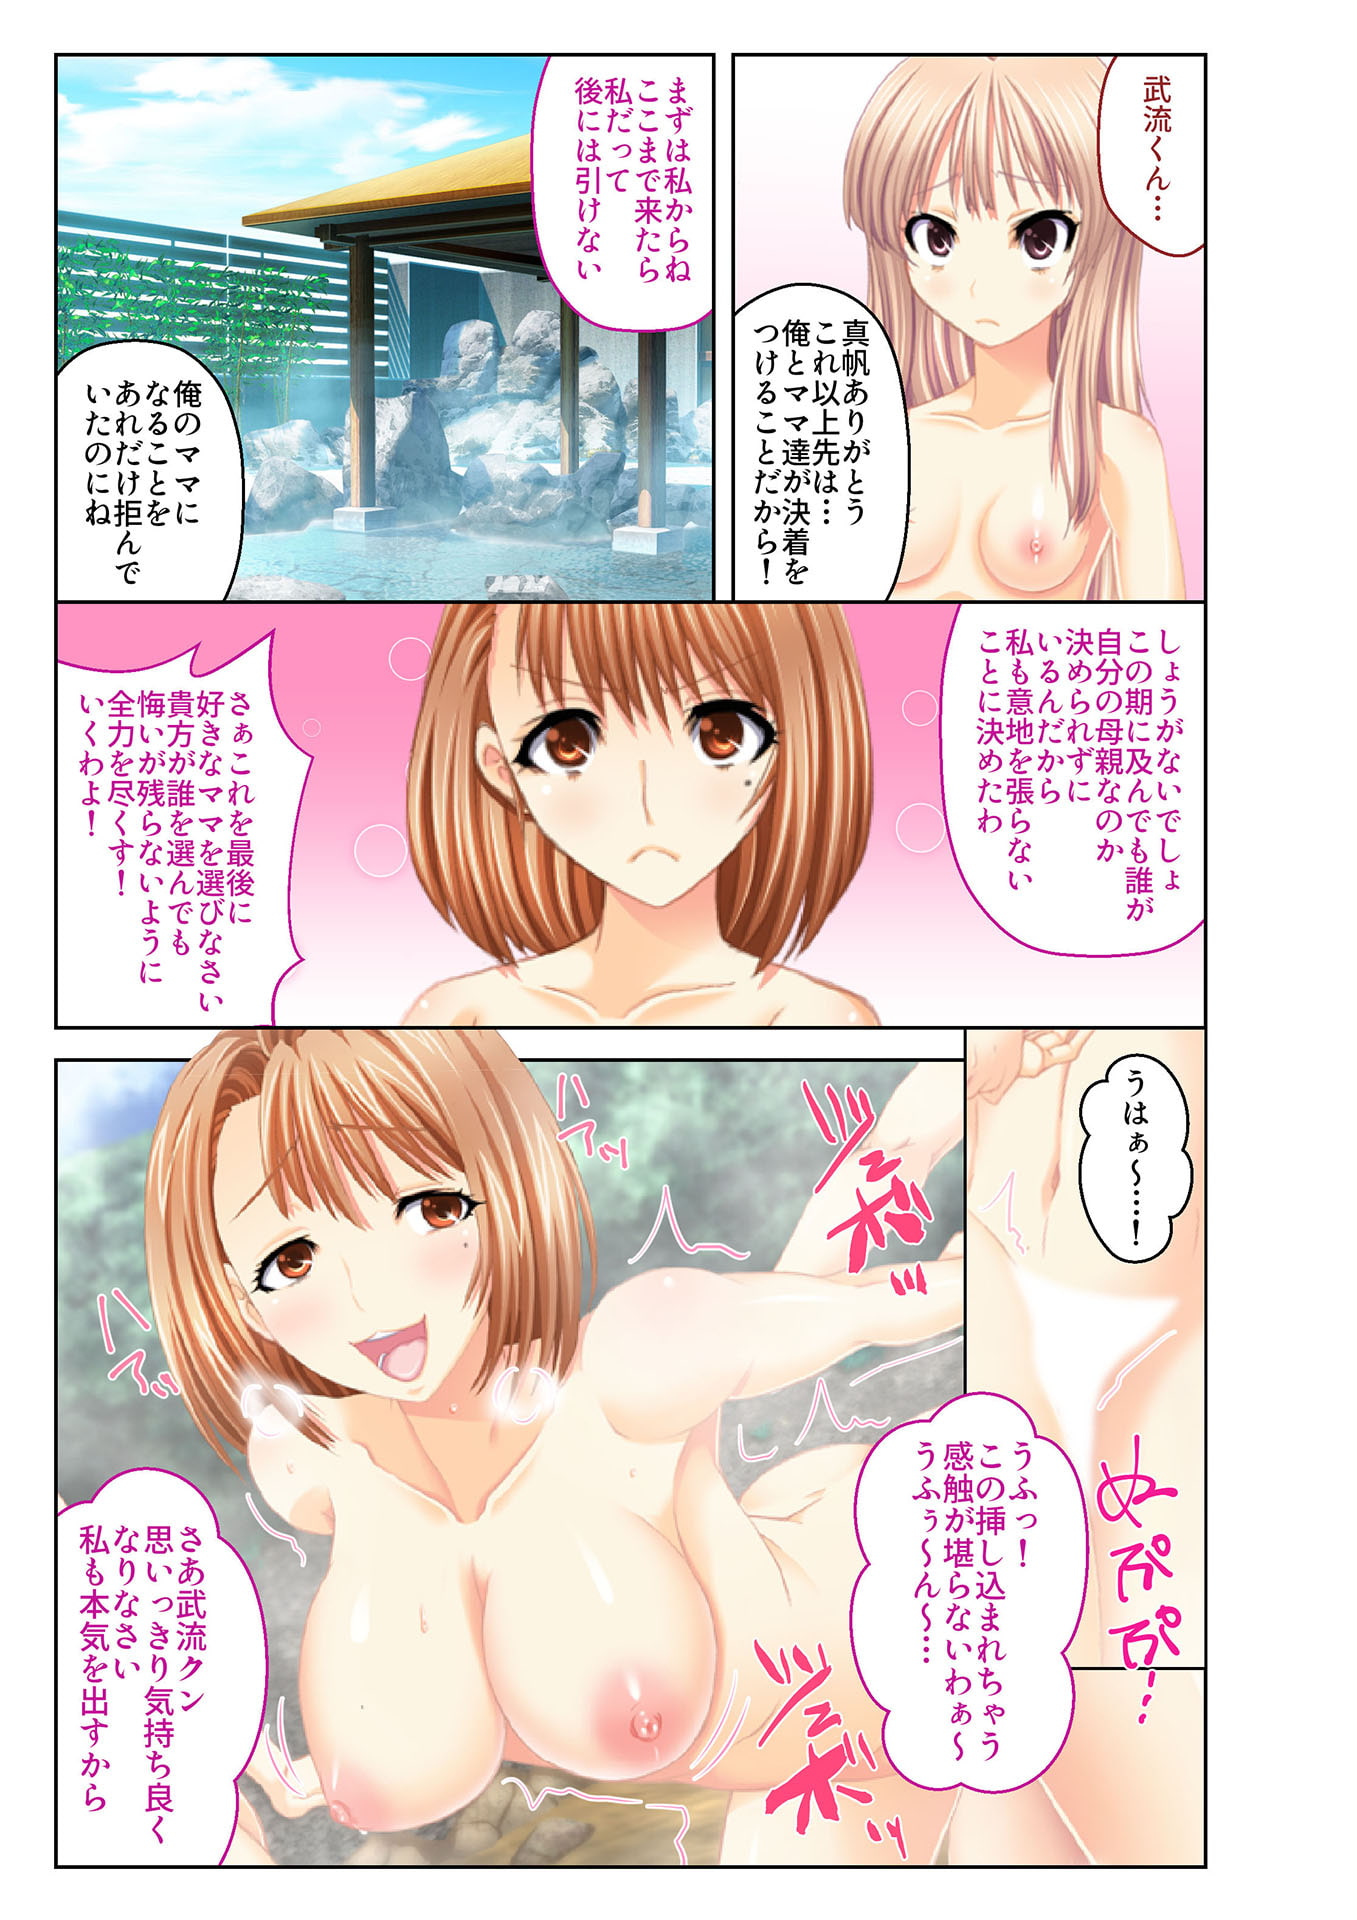 Manga [Full Color] Seducing Young Wives! Harem of Stepmothers (5)